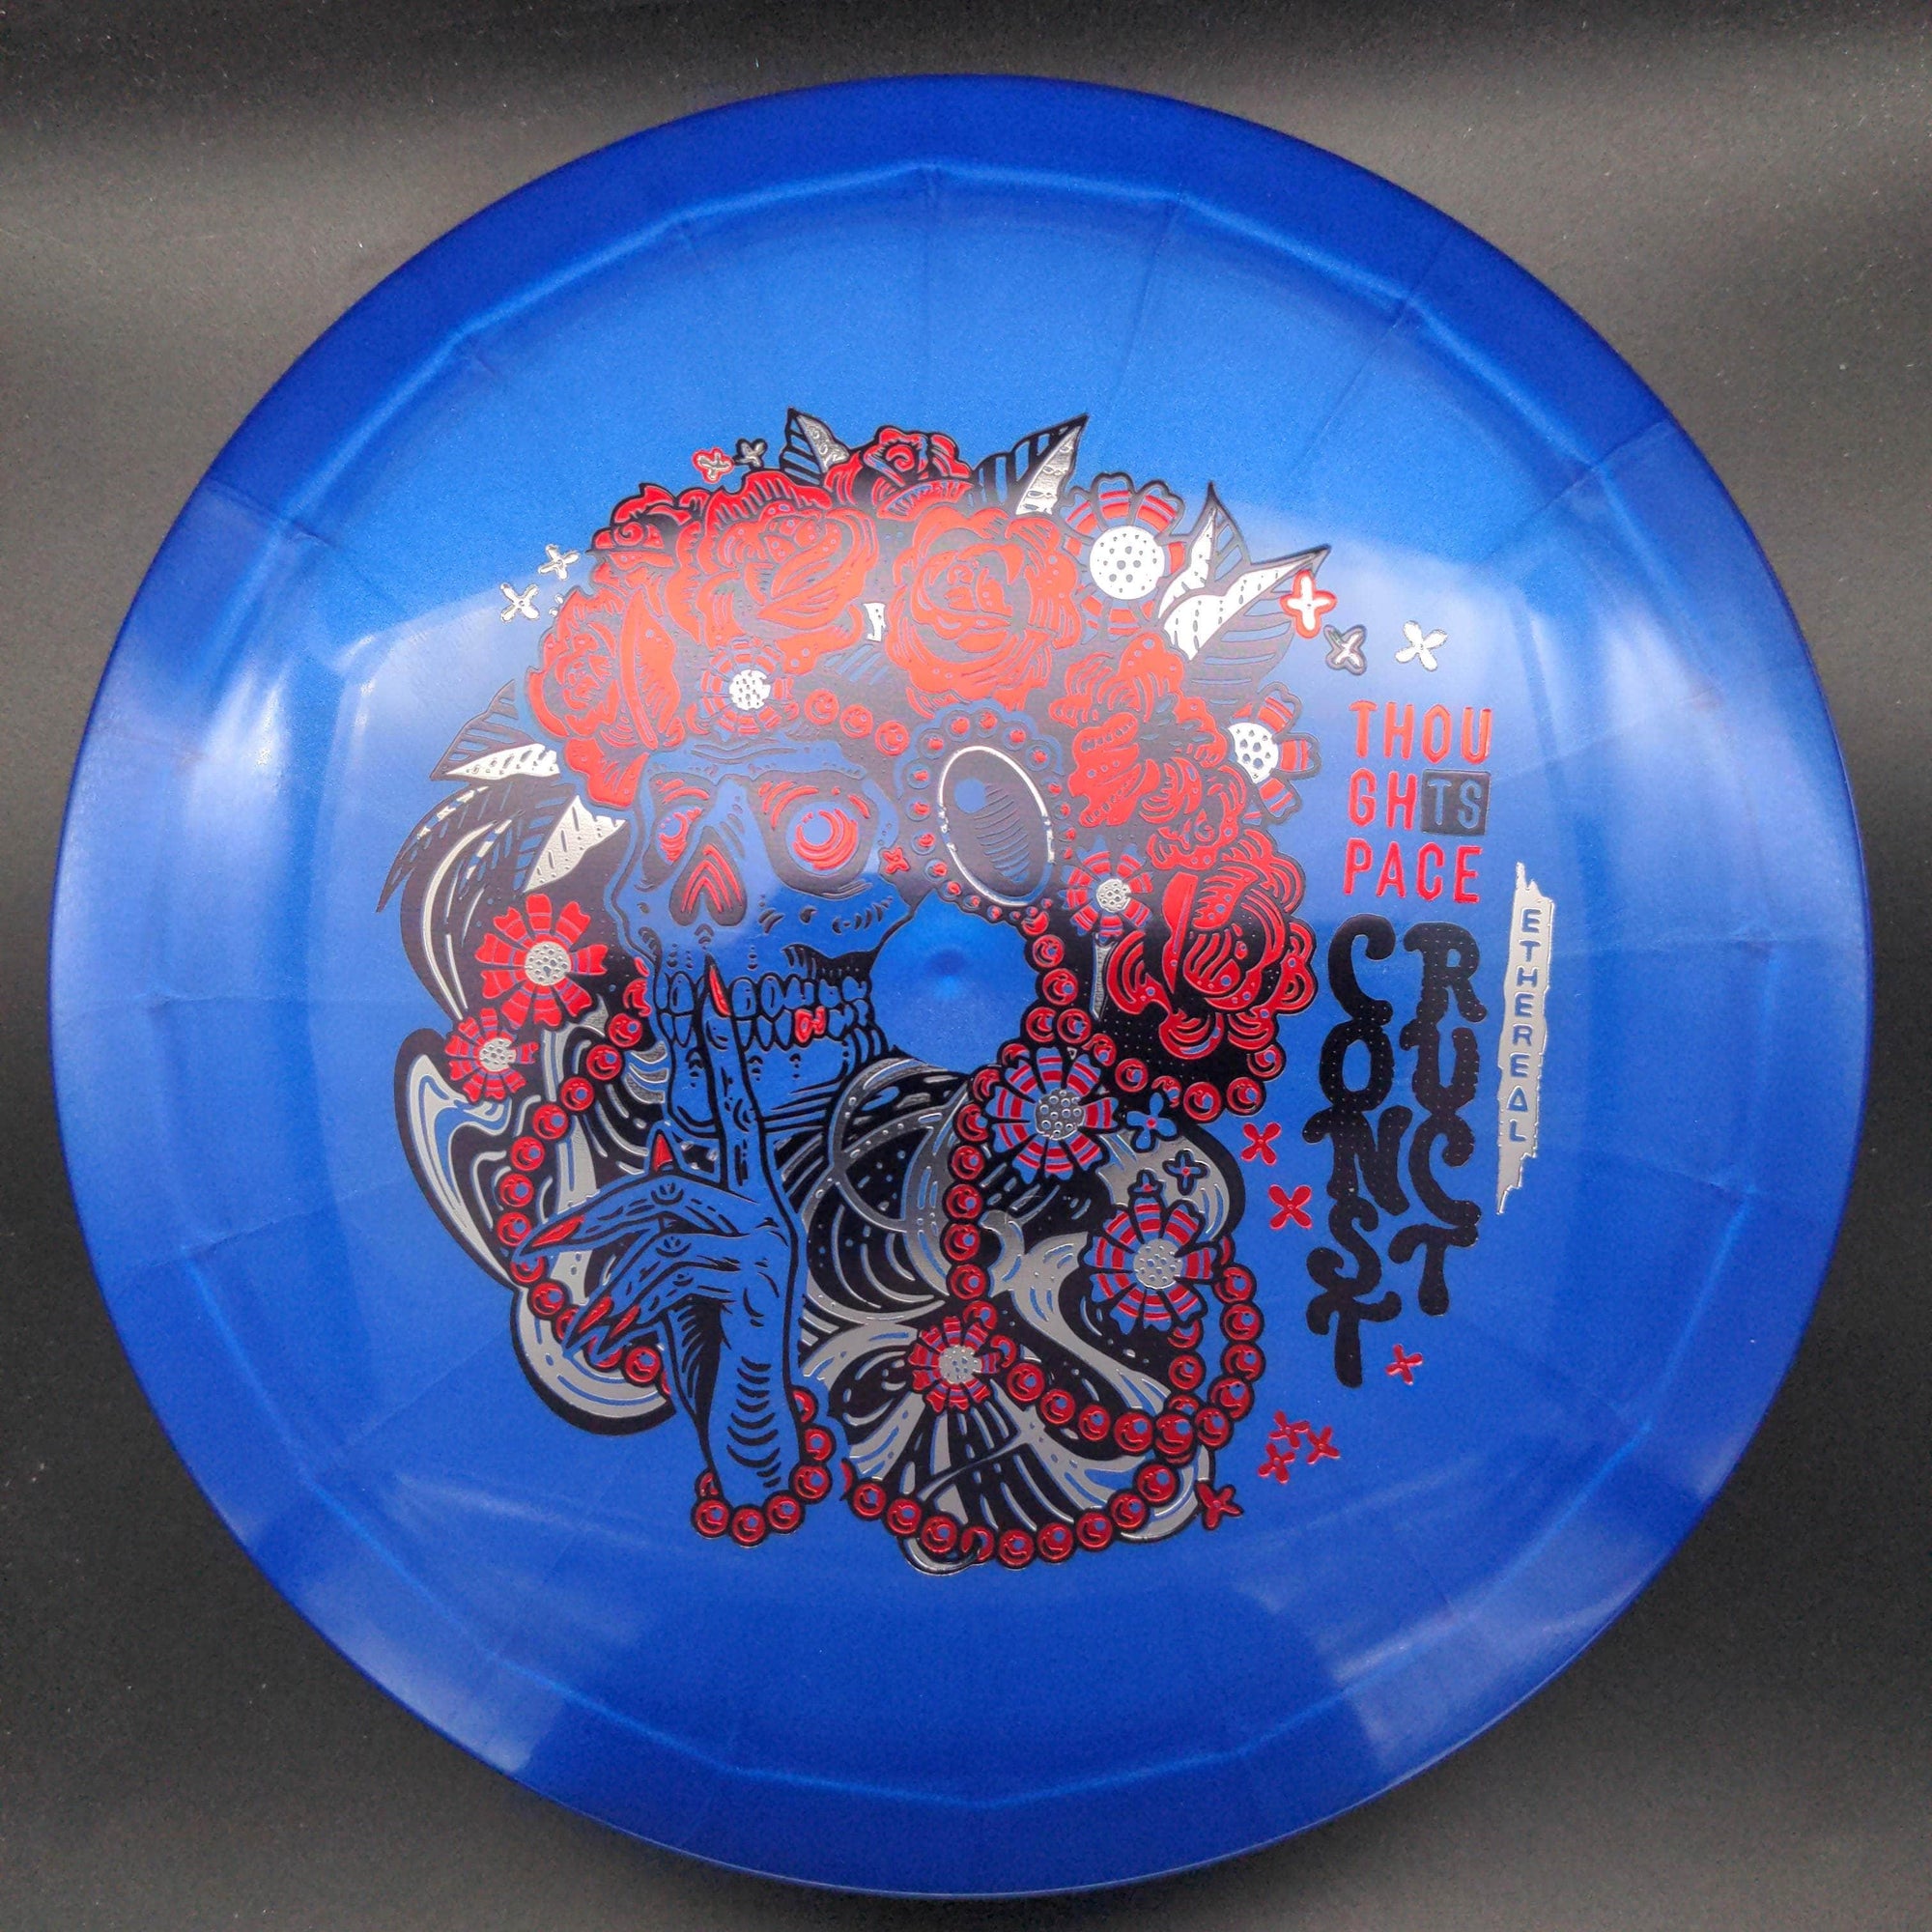 Thought Space Athletics Distance Driver Blue Red Stamp 175g Construct, Ethereal Plastic